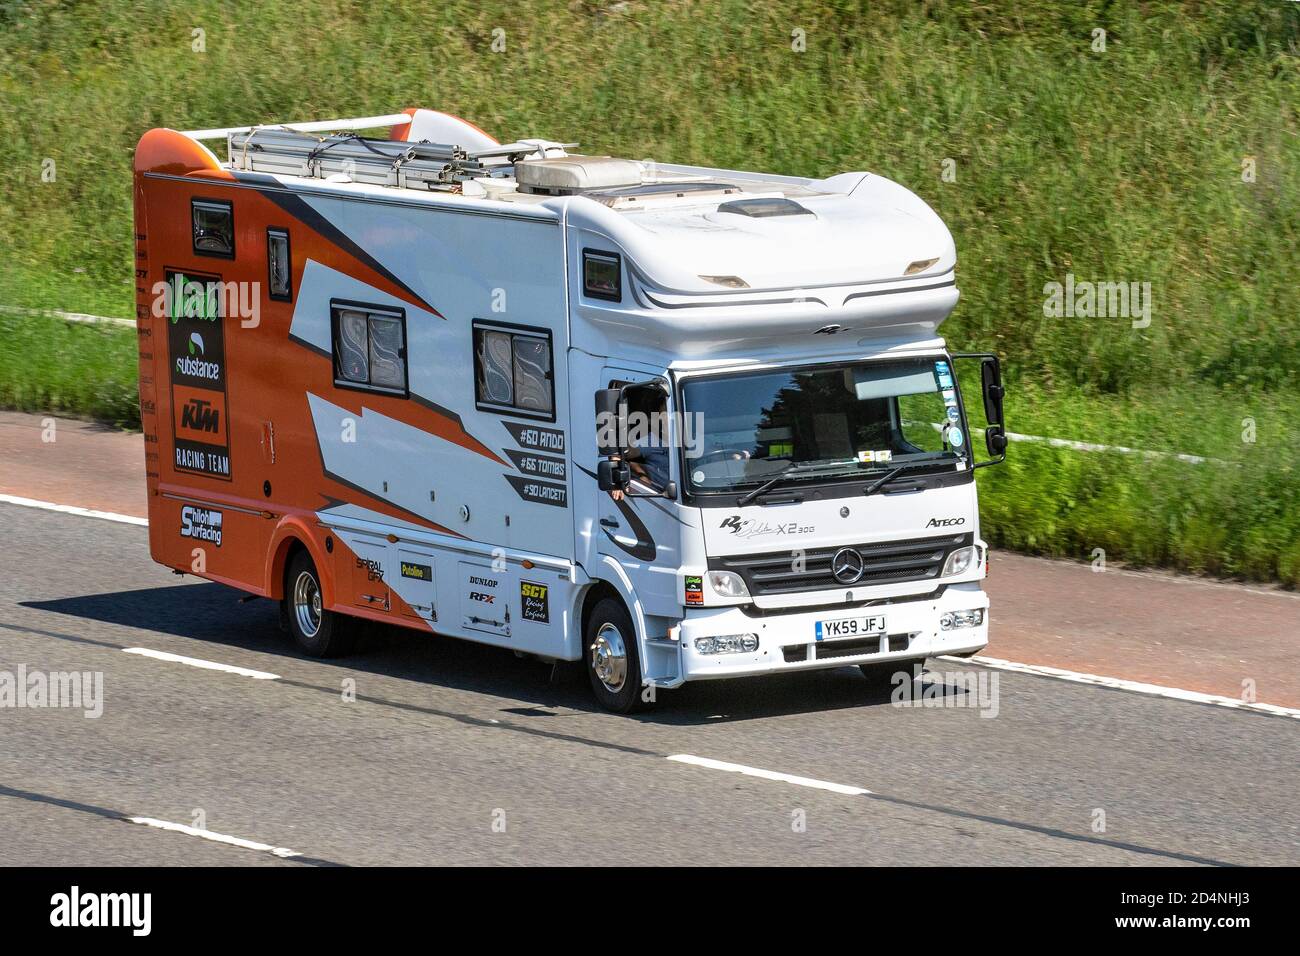 KTM Verde cycle racing team accommodation; Caravans and Motorhomes, campervans on Britain's roads, RV leisure vehicle, caravanette vacations, Touring caravan holiday, Mercedes Benz 2009 white Atego van conversions. RS Evolution x2 30G driving on the M6 motorway, UK Stock Photo